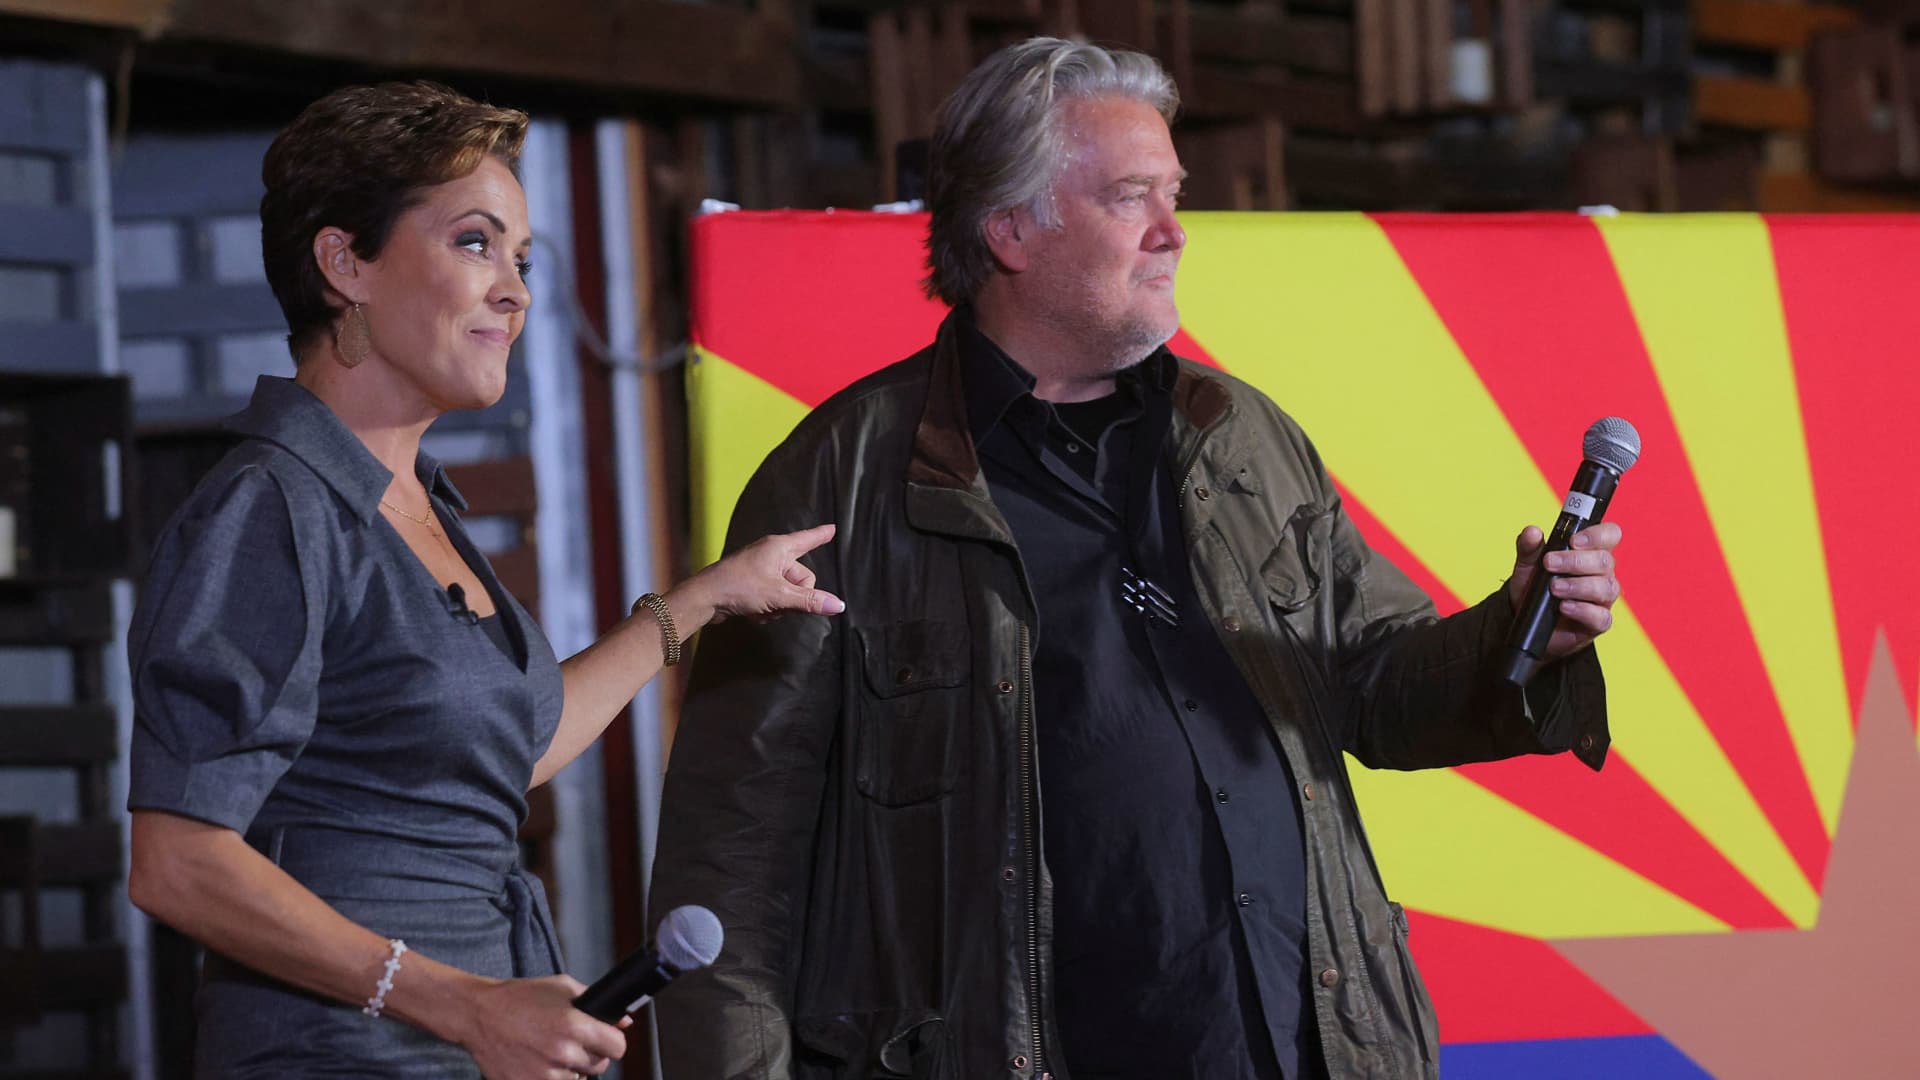 Republican candidate for Arizona Governor Kari Lake is joined onstage by Steve Bannon, former advisor to U.S. President Donald Trump, during a campaign stop on the Arizona First GOTVBus Tour in Queen Creek, Arizona, U.S., November 6, 2022. 